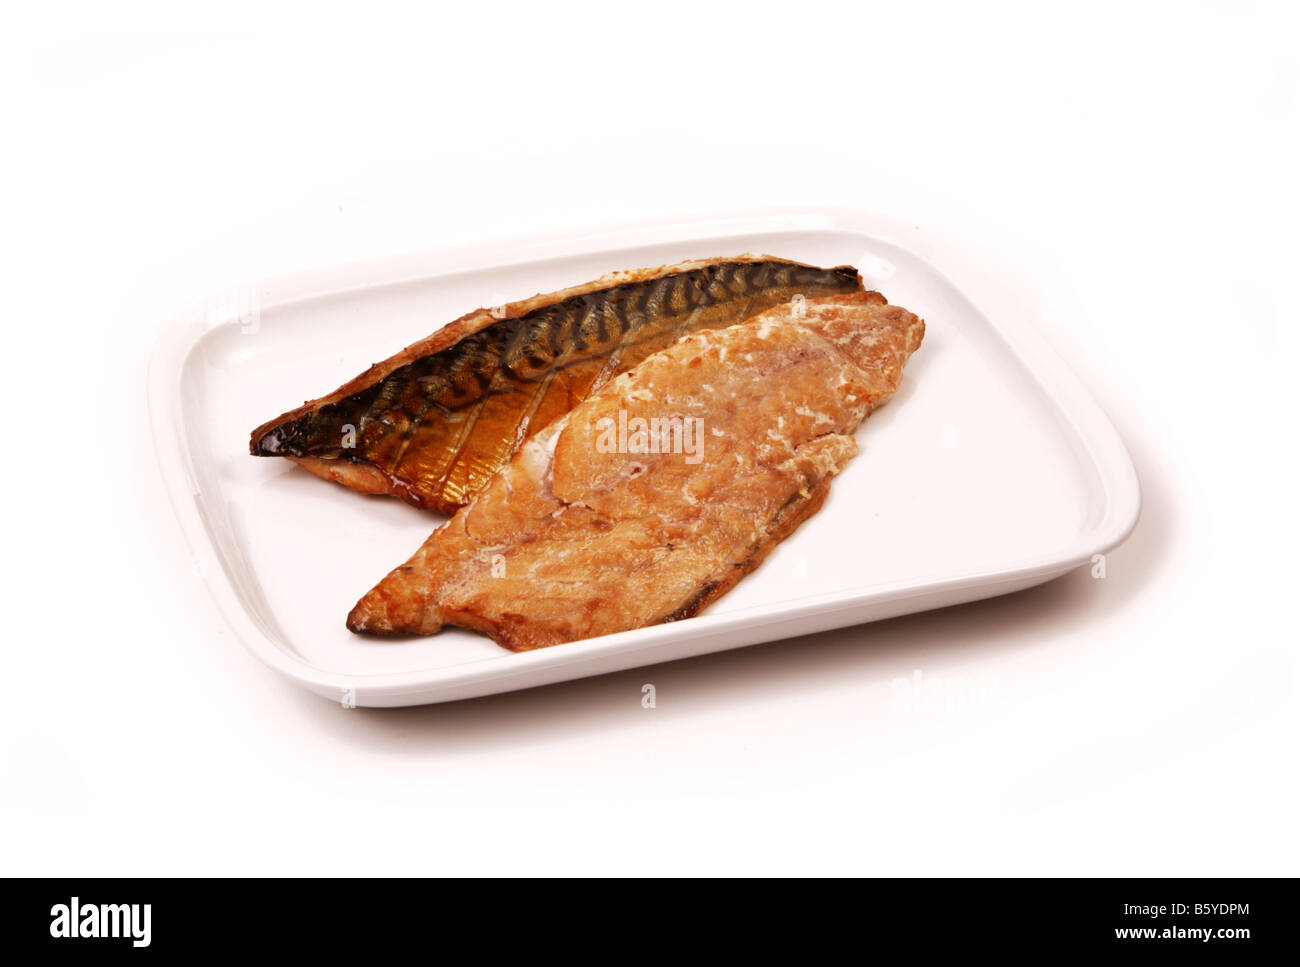 Fillets of Home Smoked Mackerel on a Plate Cut Out Stock Photo